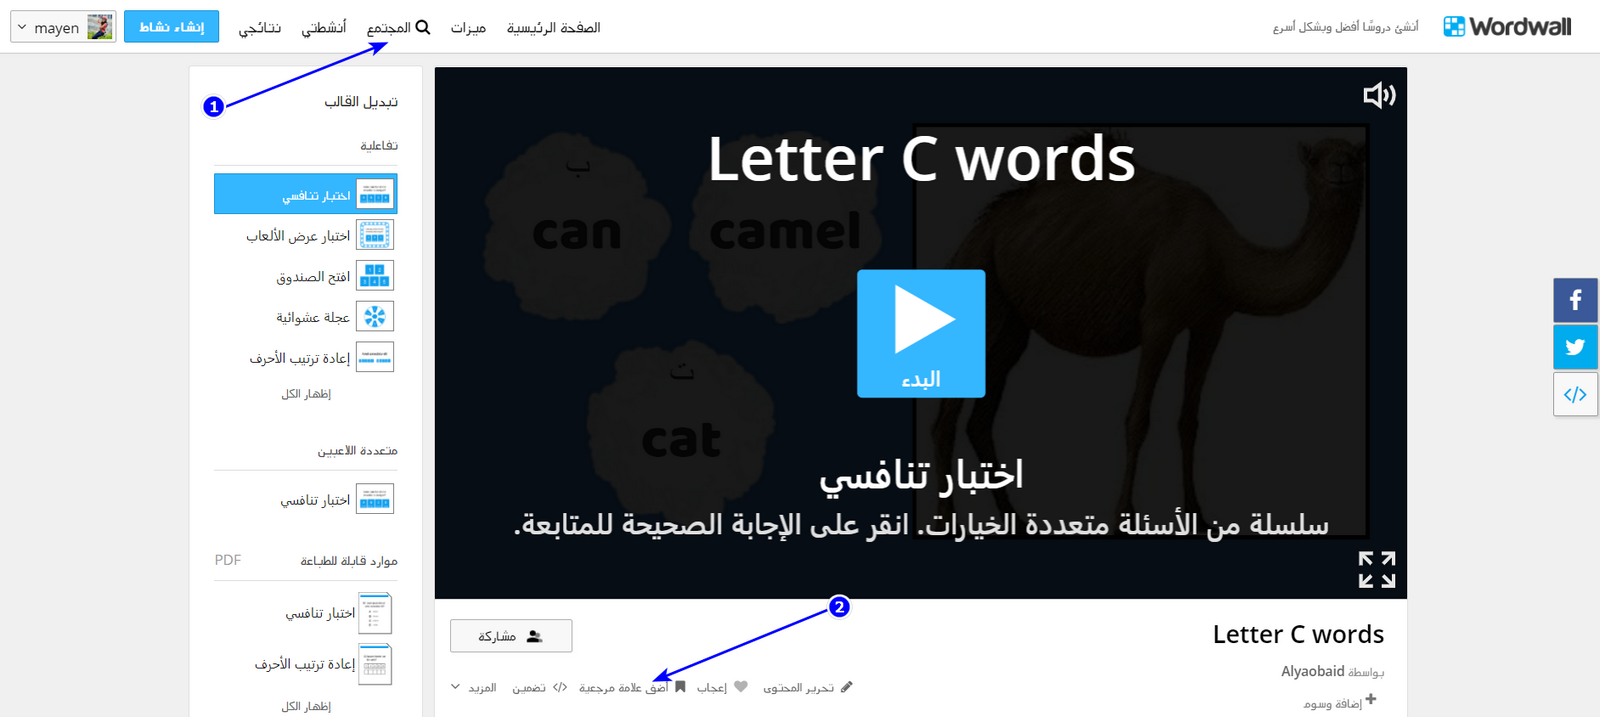 How_to_bookmark_an_activity_from_the_community_page_-_Arabic_1.png